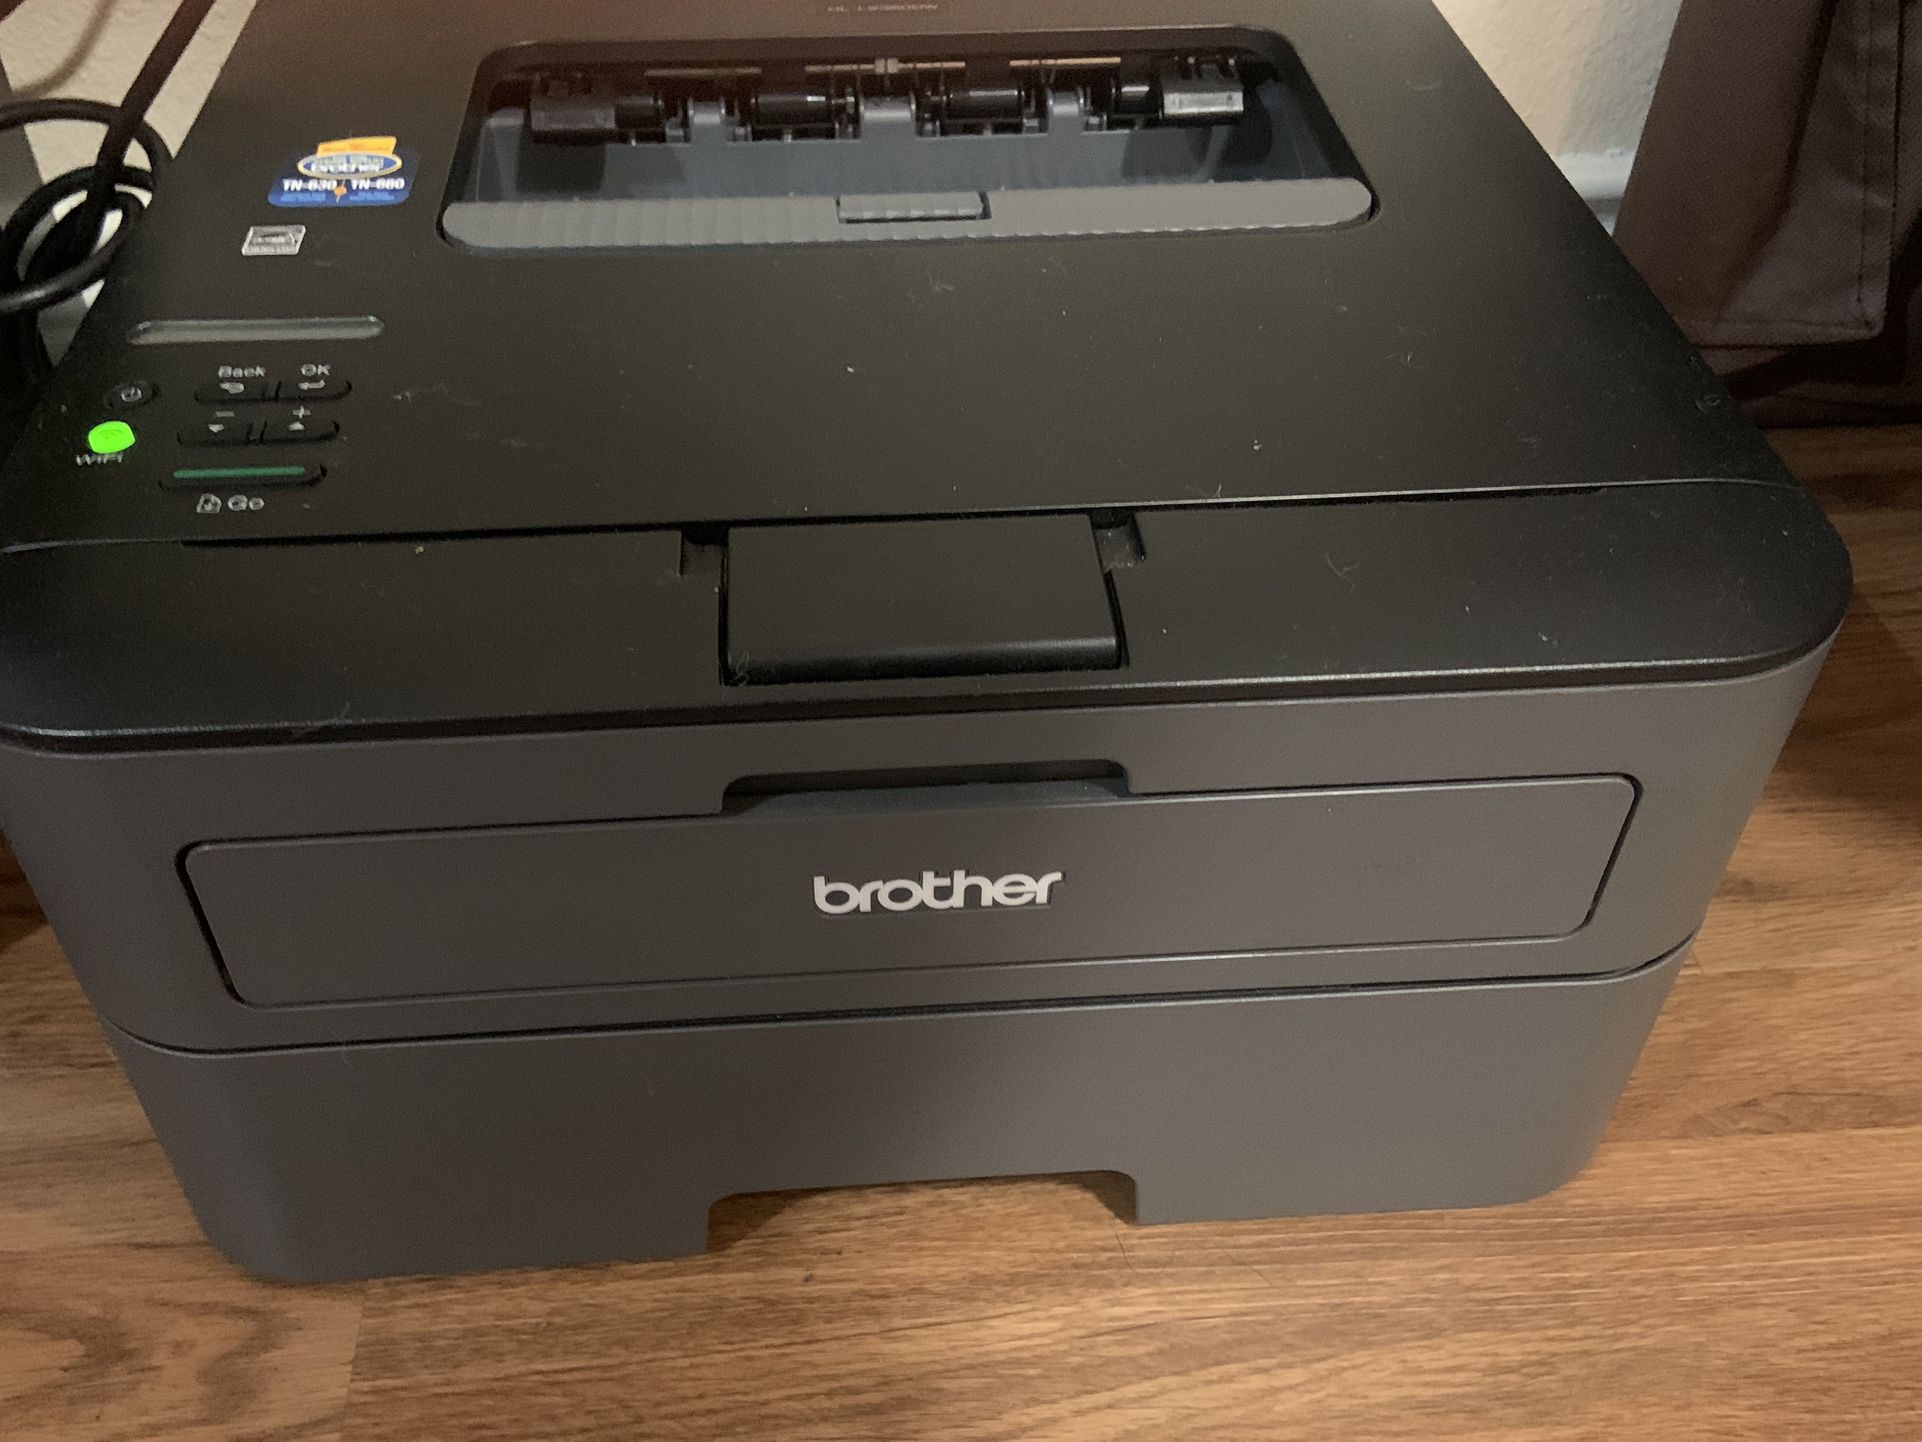 Brother black and white wifi printer